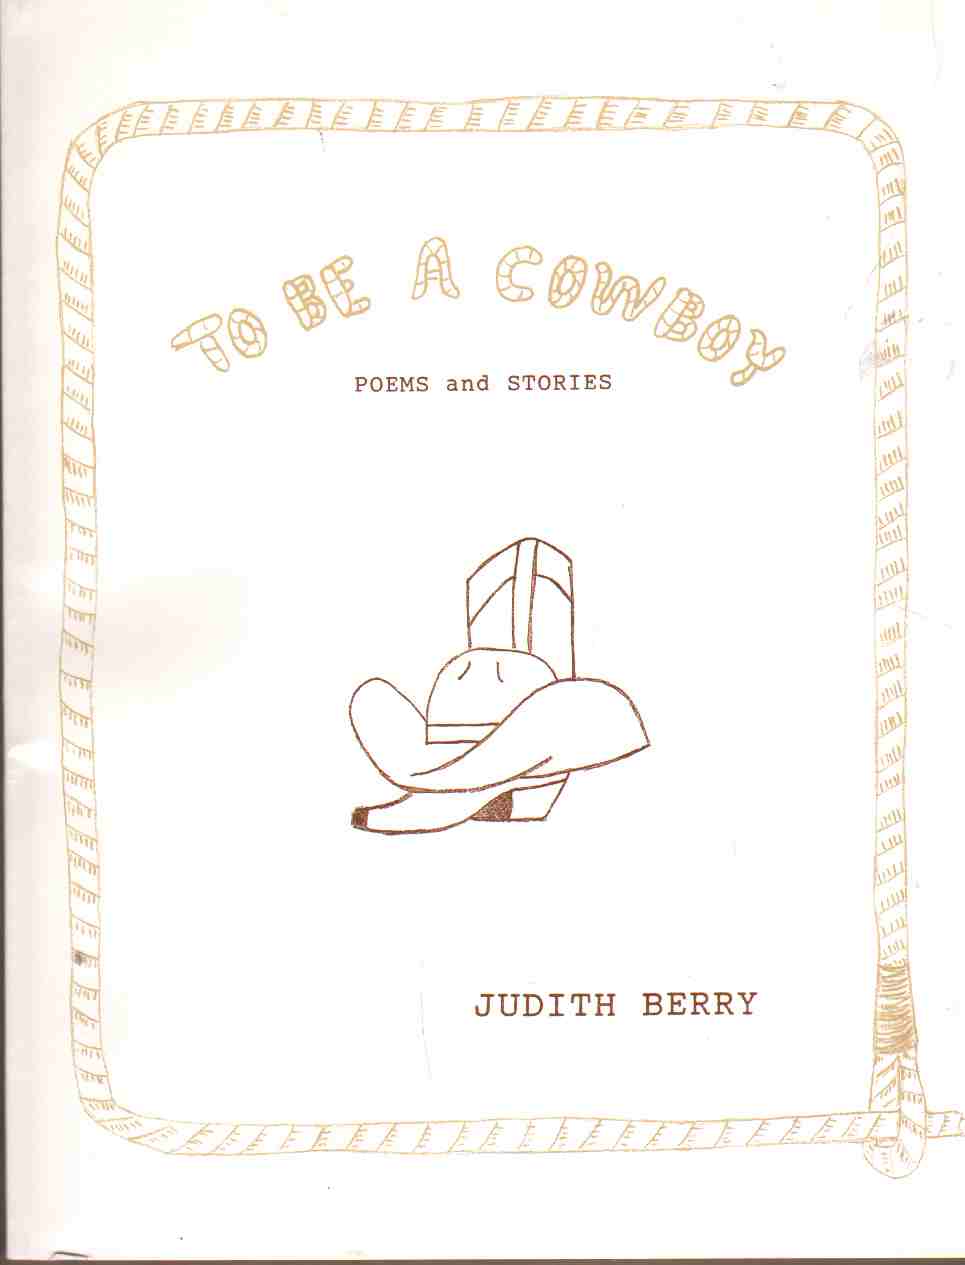 Berry, Judith - TO BE A COWBOY Poems and Stories